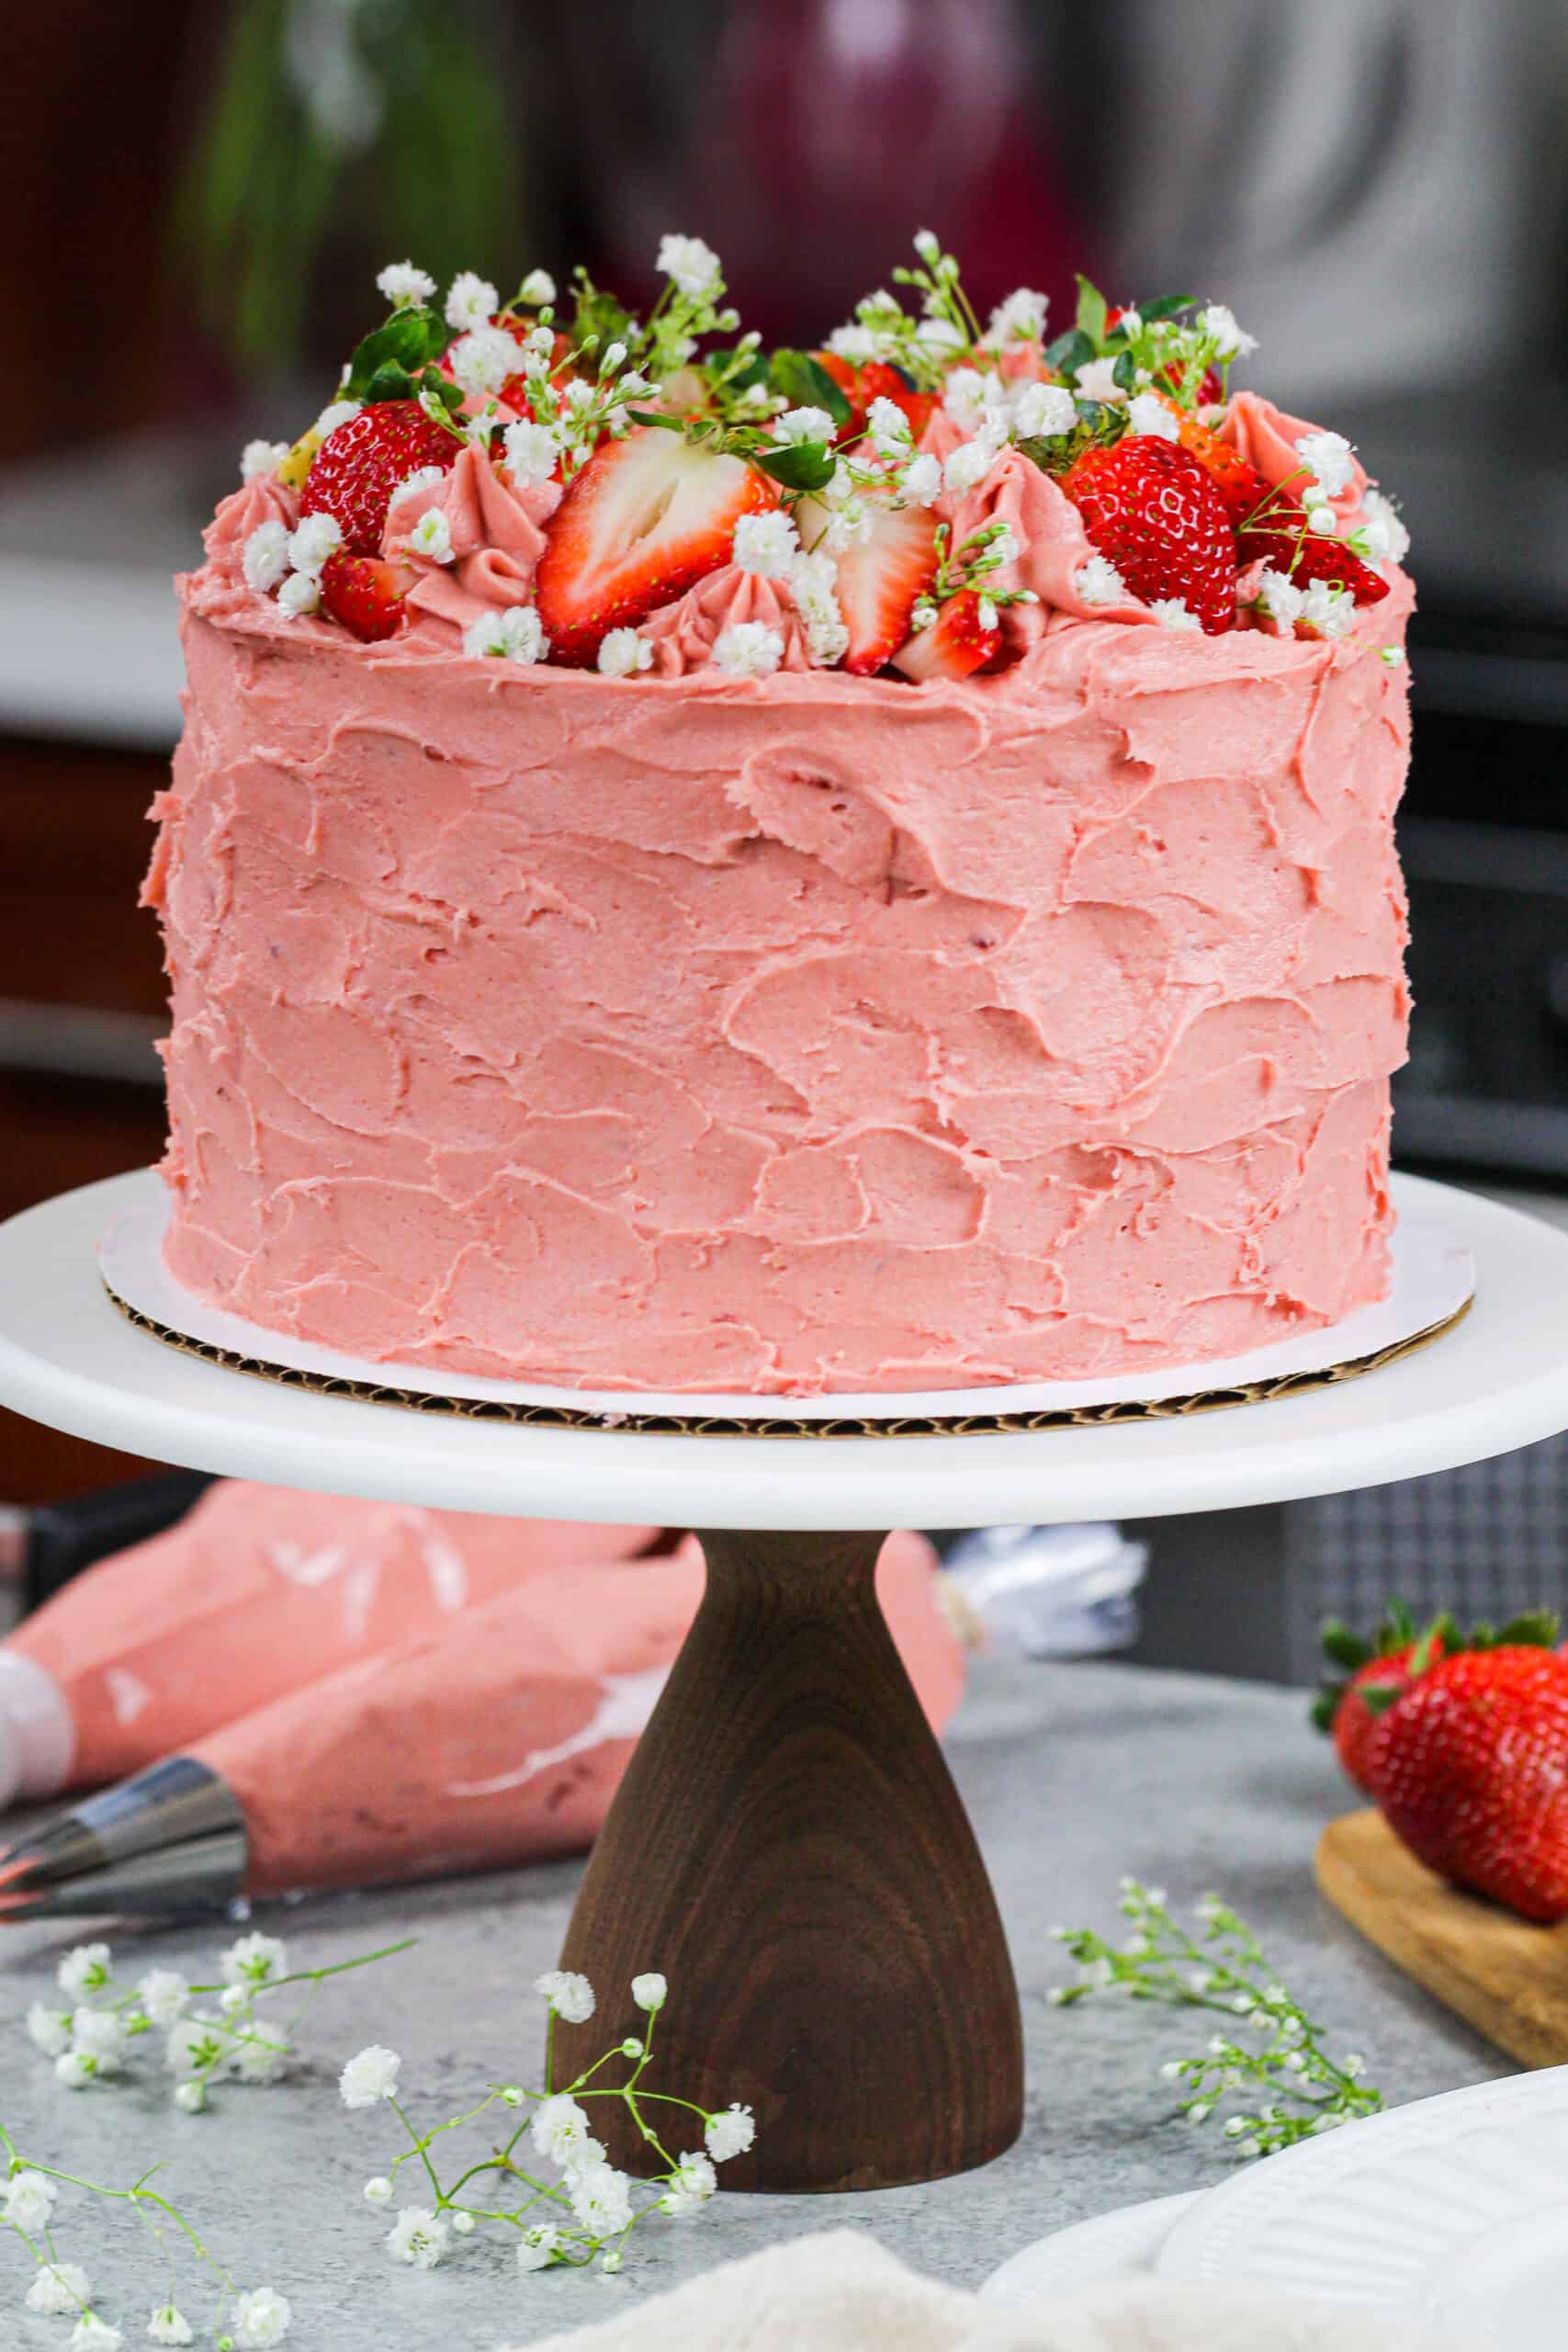 The Cake Bake Strawberry Cake, Weight: 500 Grams at Rs 500/kg in Ghaziabad